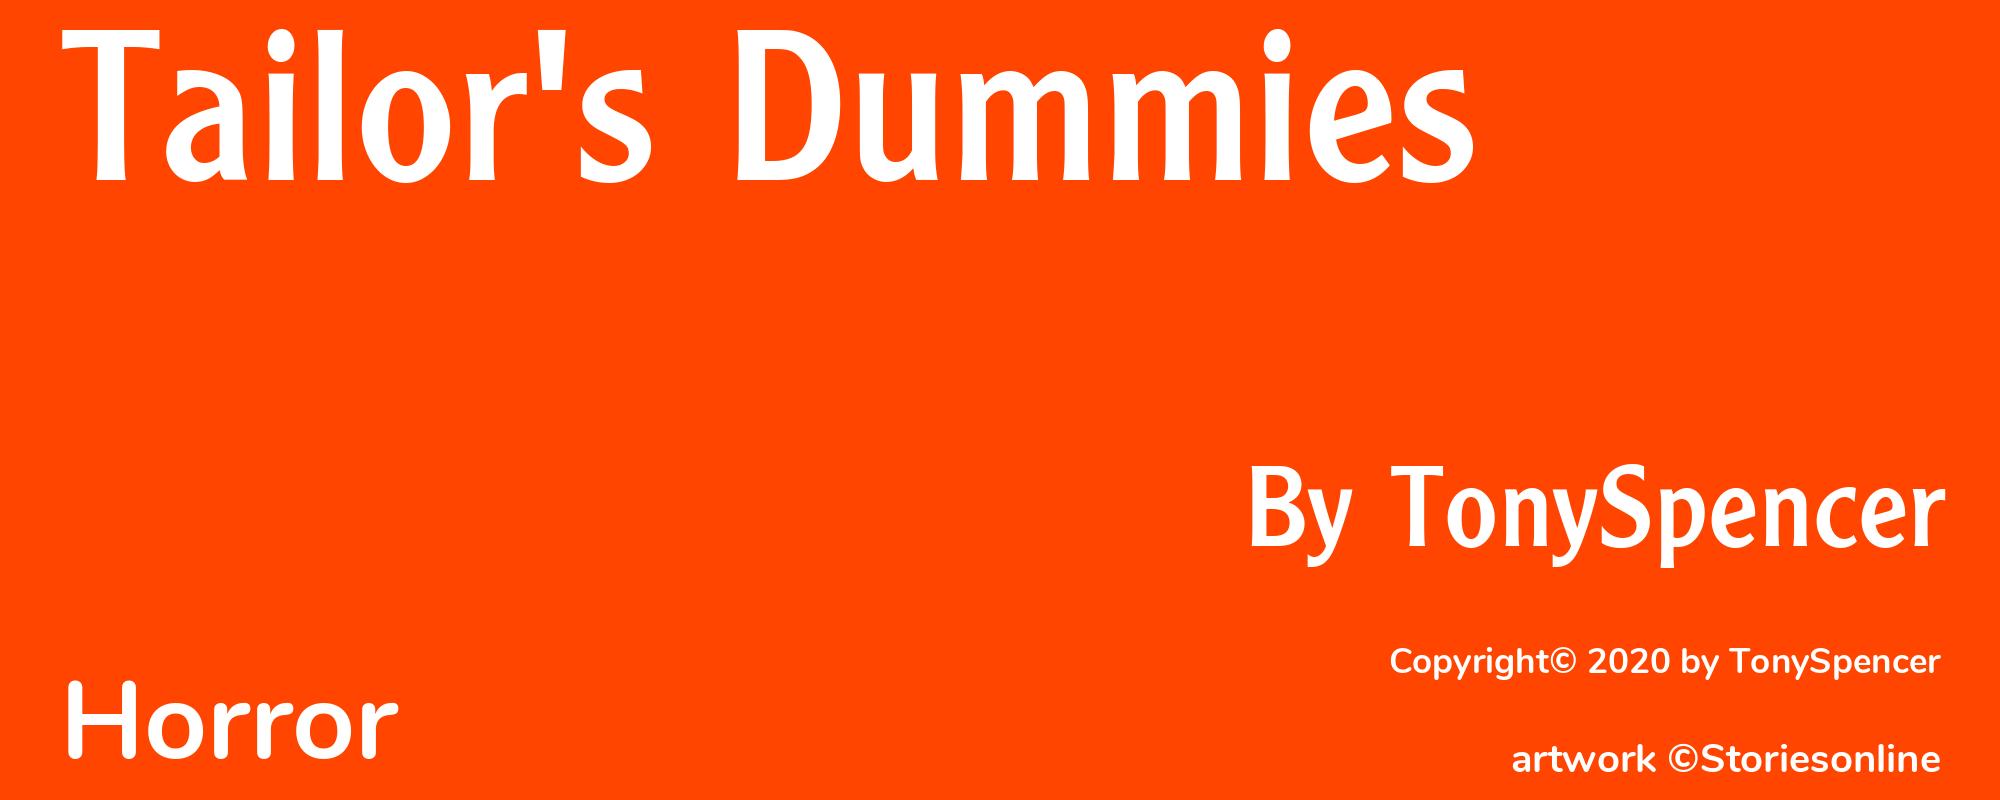 Tailor's Dummies - Cover